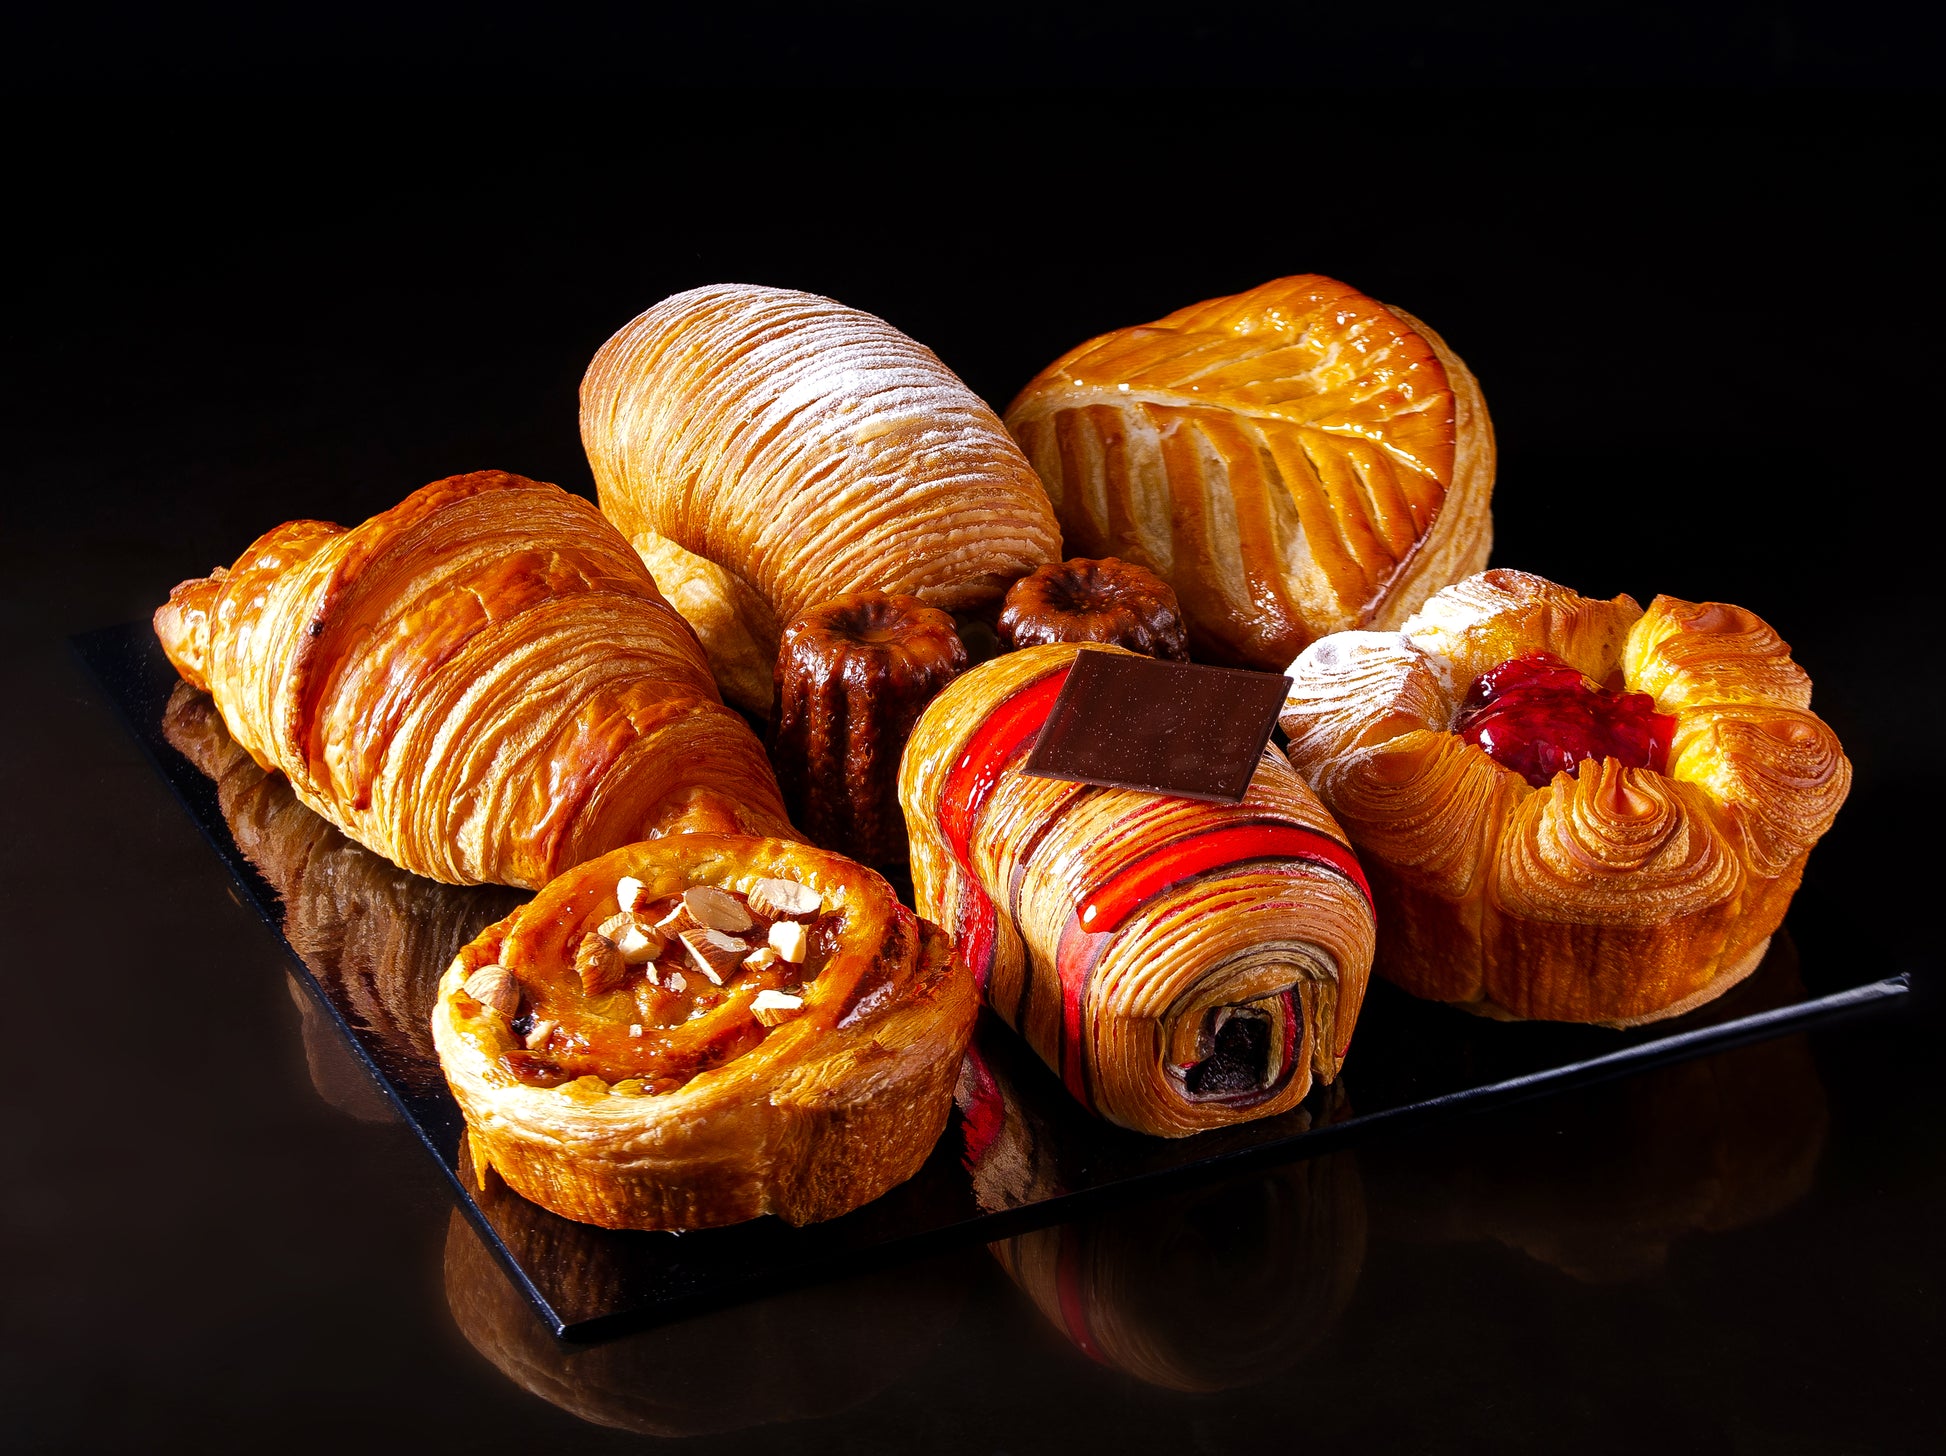 Patisserie Nobel Savour our Nobel Set, curated to showcase the pride, technique and fine ingredients that represent our viennoiserie. Let these simple yet precise masterpieces journey you through the legacy origins of breakfast pastries of Austria to France. Crafted by our Master Patissier and of course only with the finest French Butter, straight from the oven to your table. 